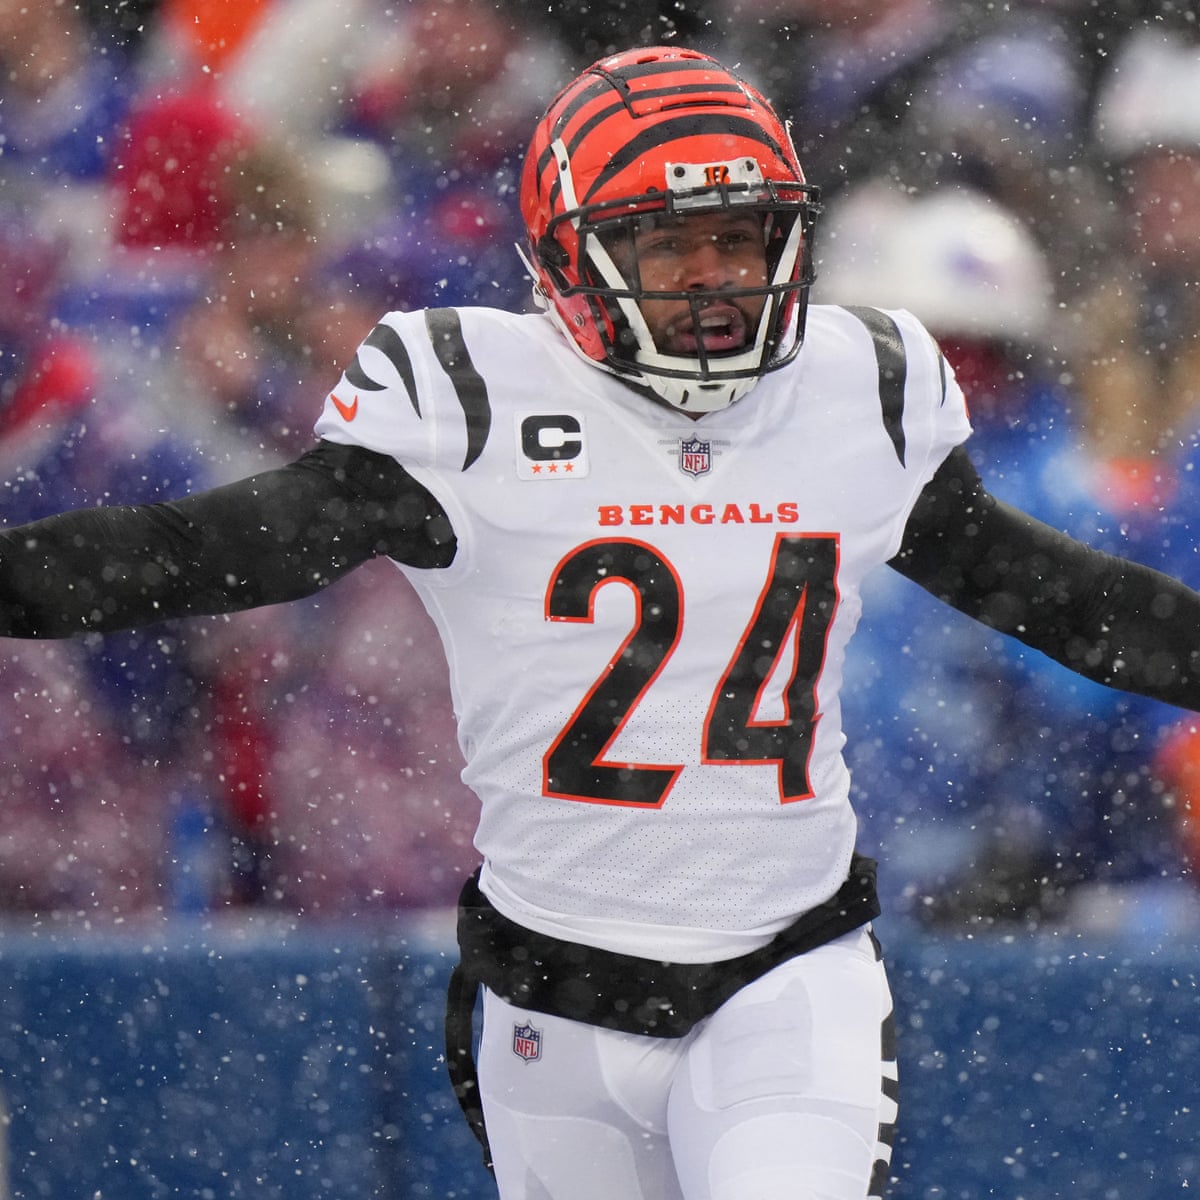 Bengals return to AFC Championship Game after outclassing Bills